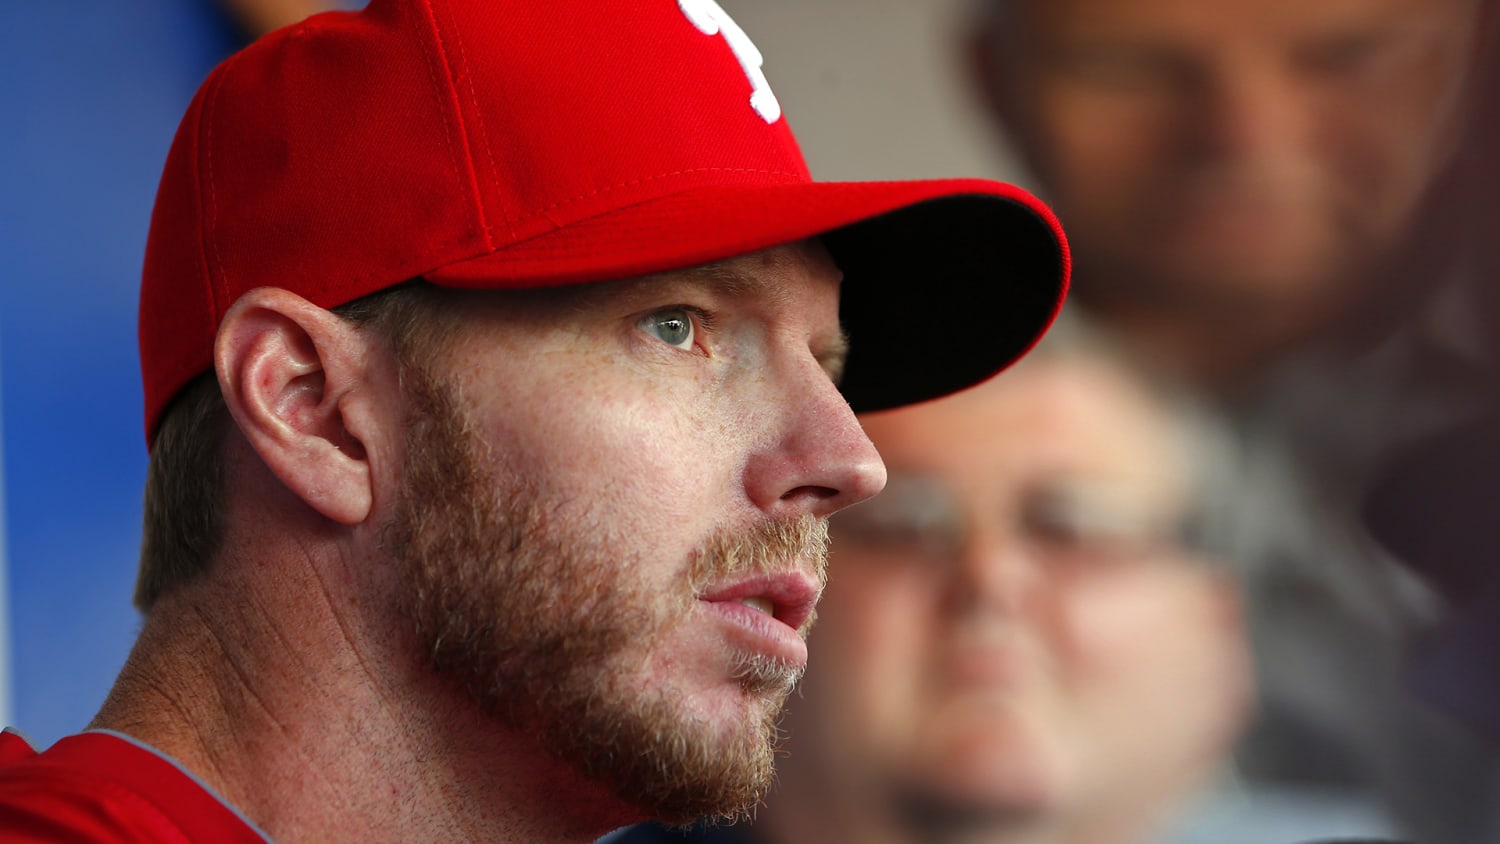 Teammates mourn the loss of former star pitcher Roy Halladay